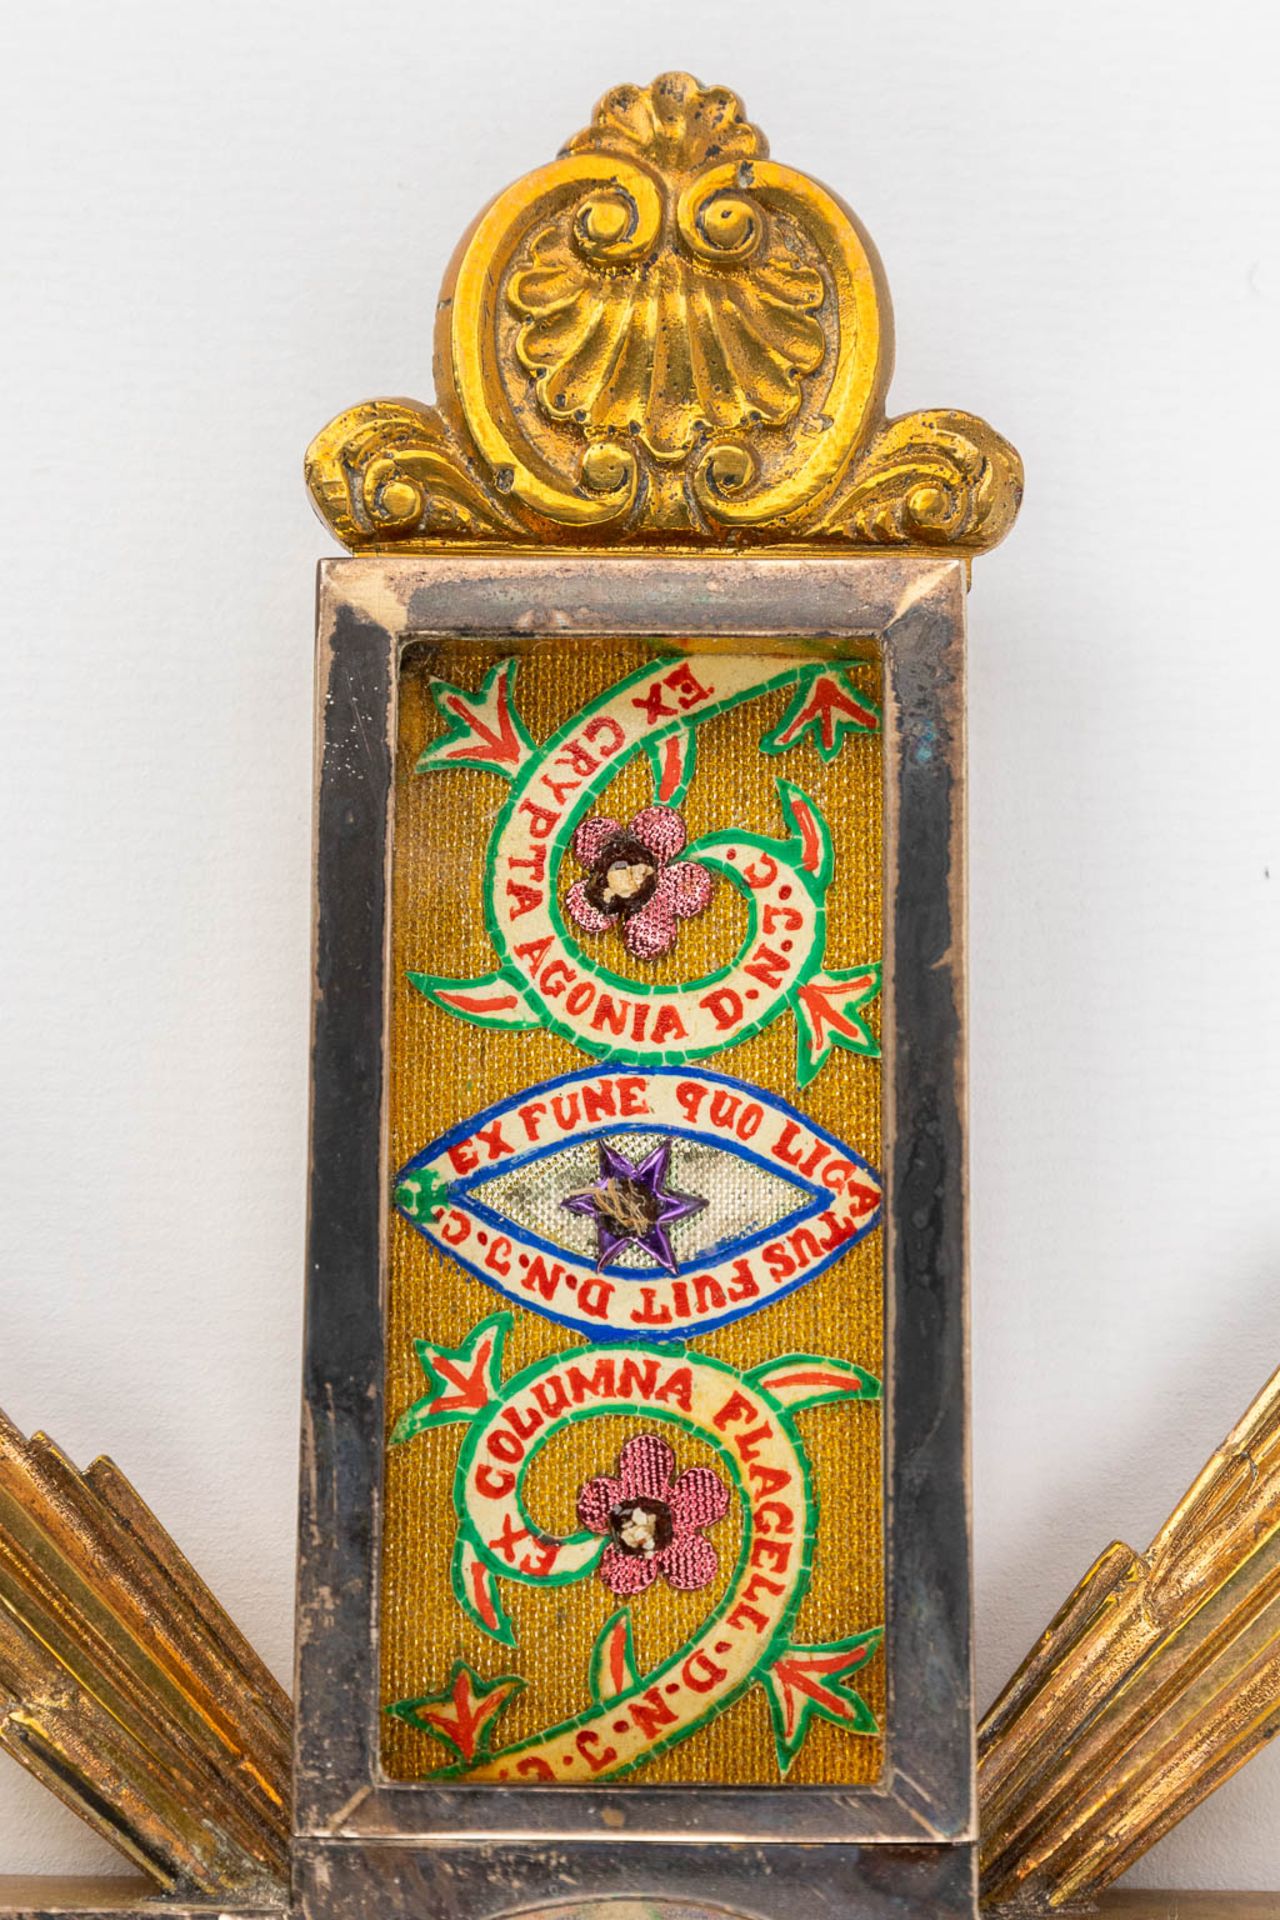 An antique reliquary box with relics a relic crucifix and embroidery. (L:13 x W:52 x H:75 cm) - Image 14 of 23